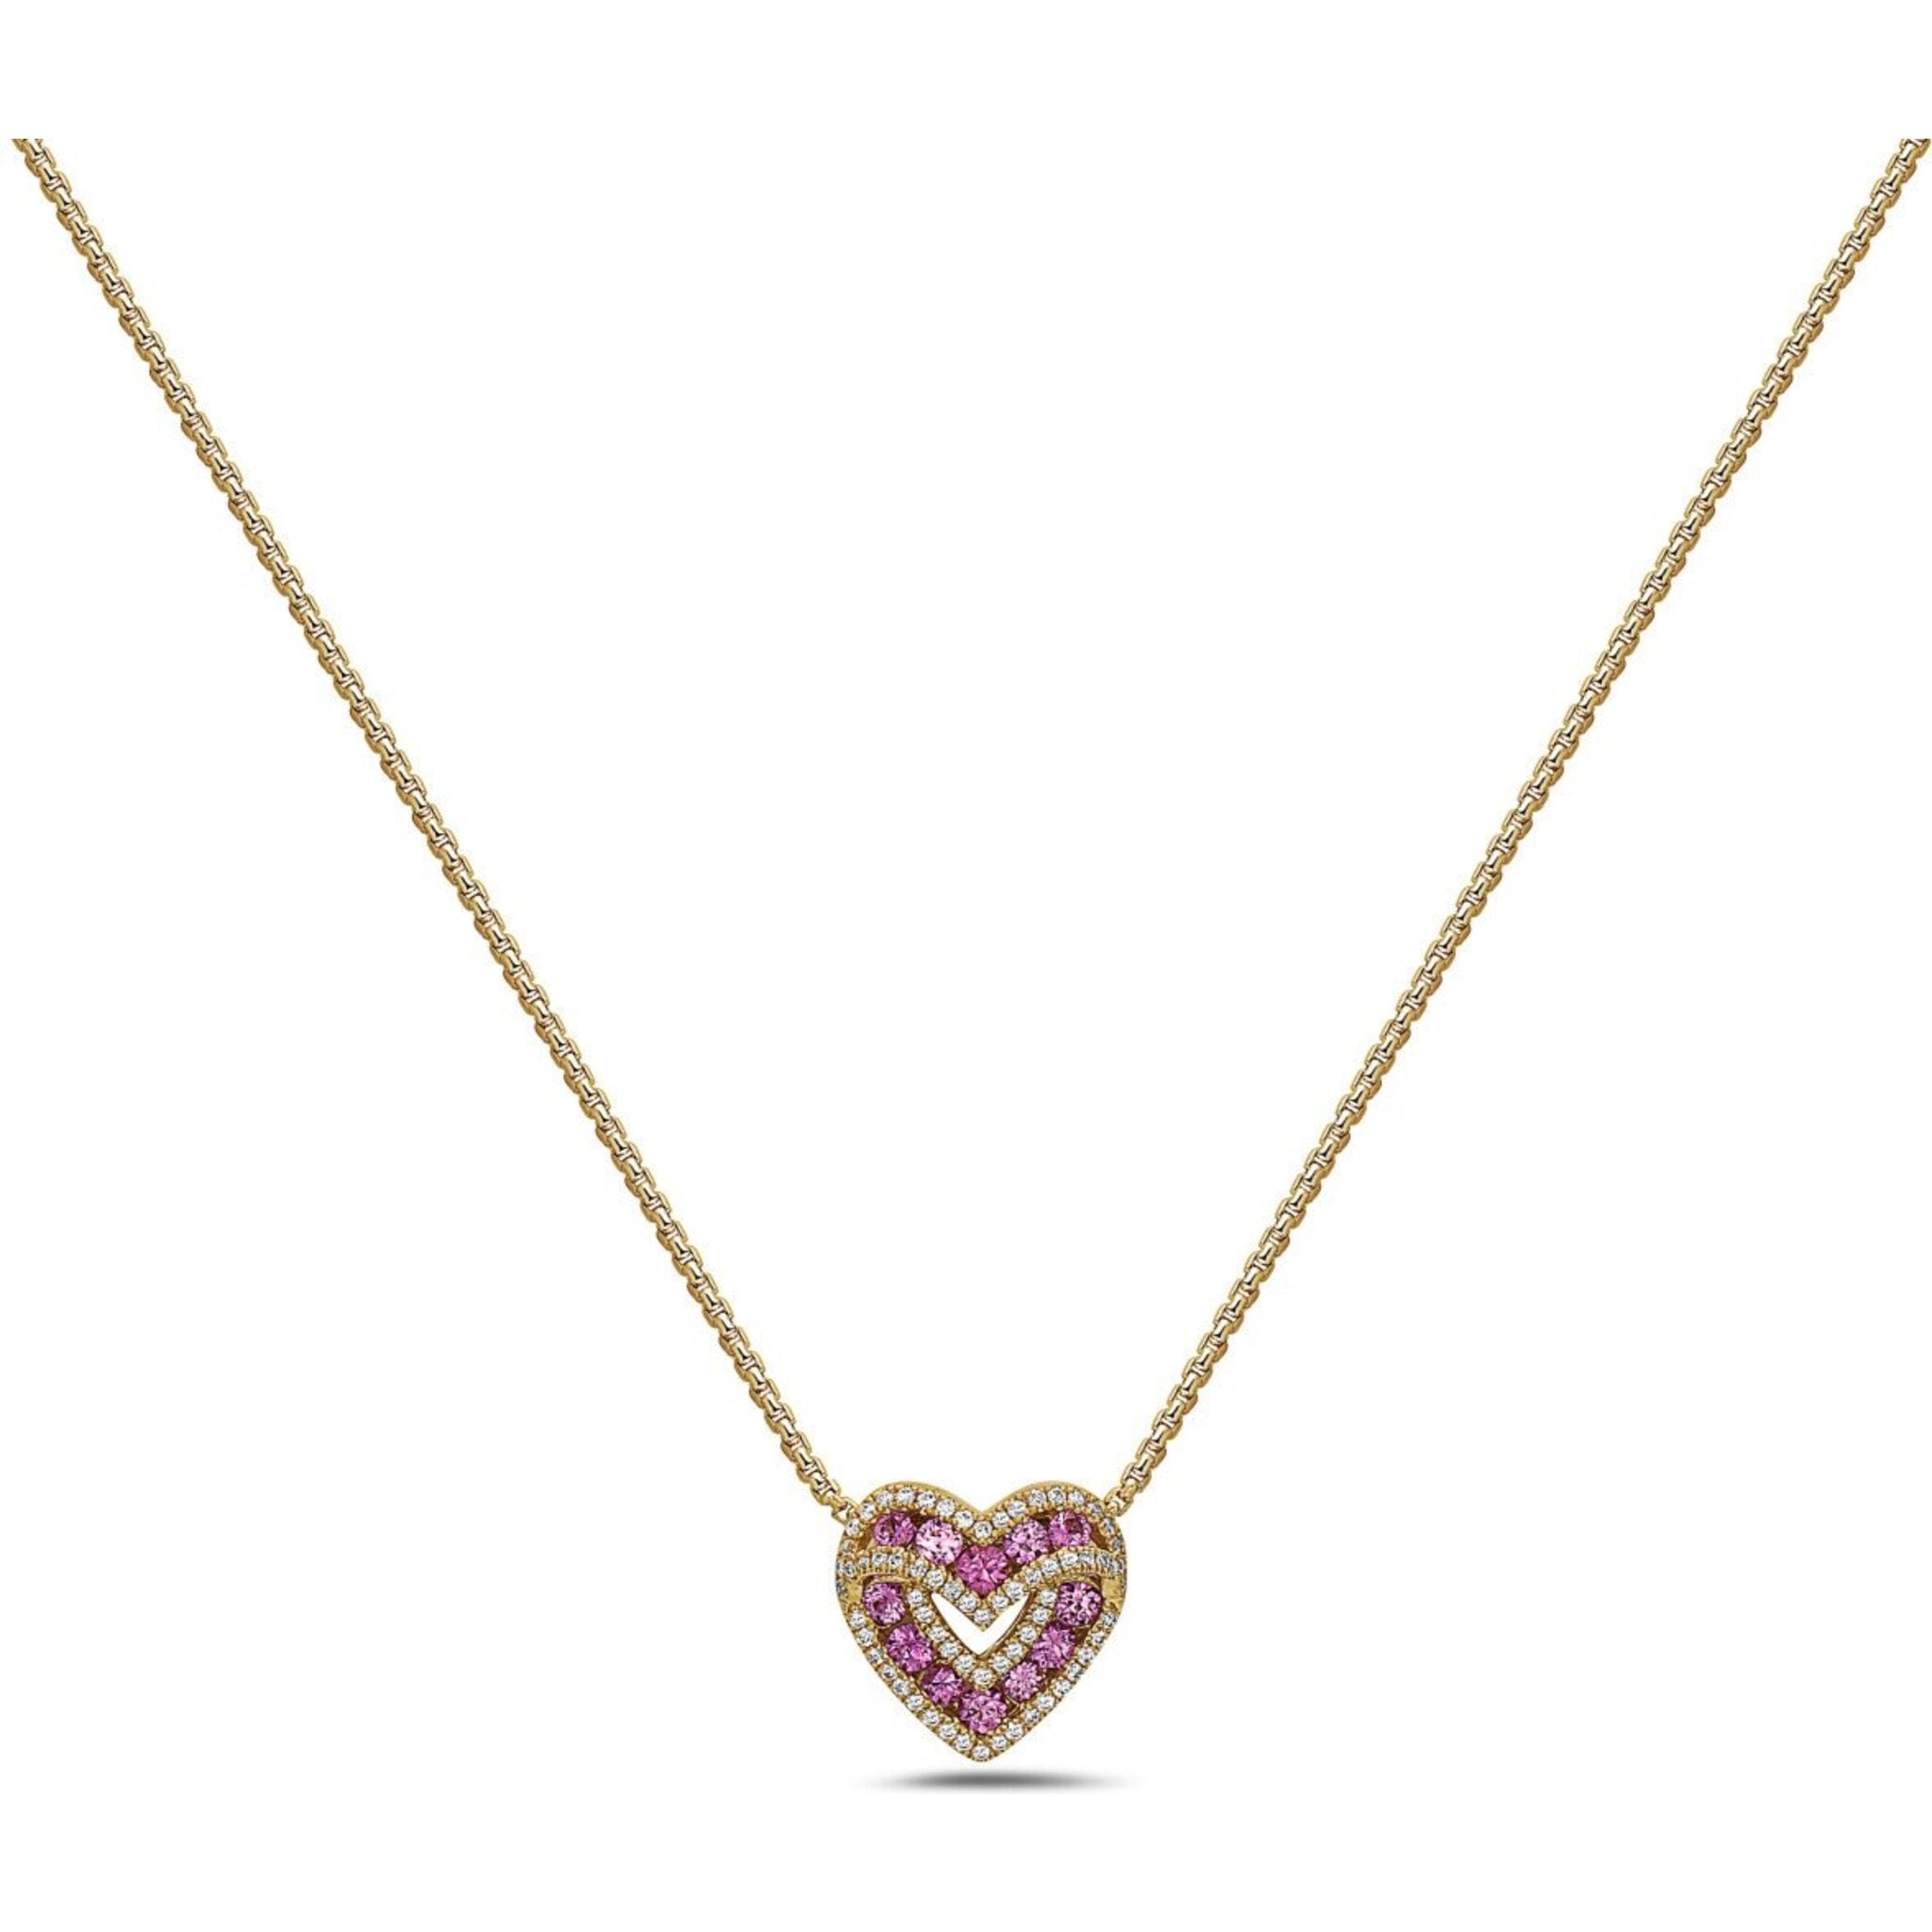 Charles Krypell - Diamond Sweetheart Pendant - Yellow Gold and Pink Sapphire / 18k Yellow Gold